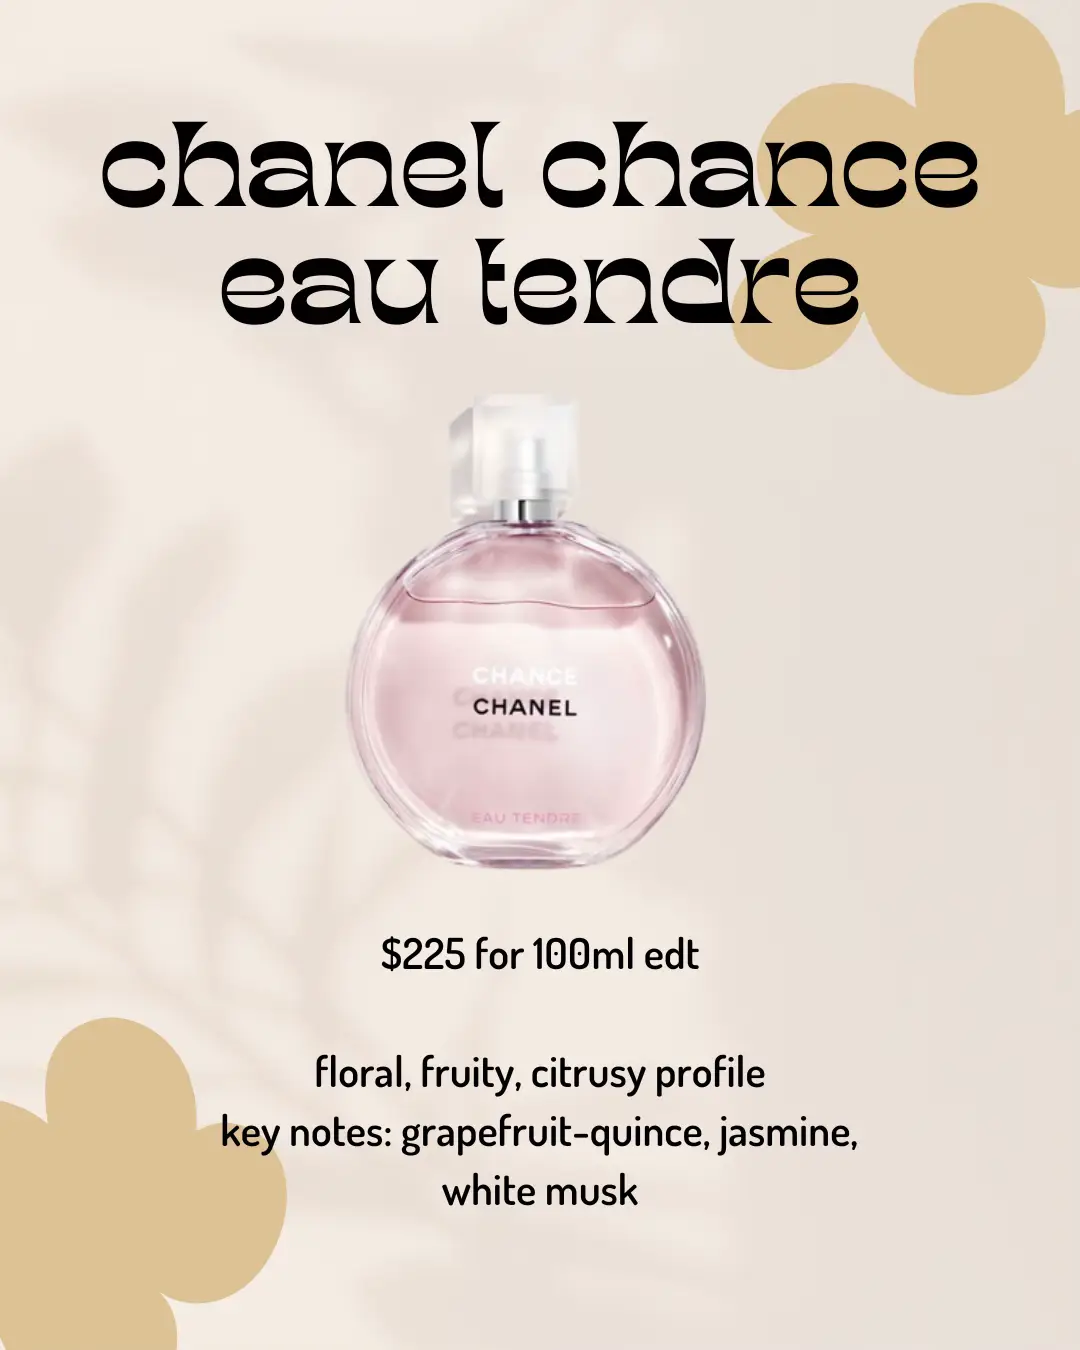 Perfume dupes: Zara Applejuice vs Chanel Chance 🍏✨, Gallery posted by  chloe